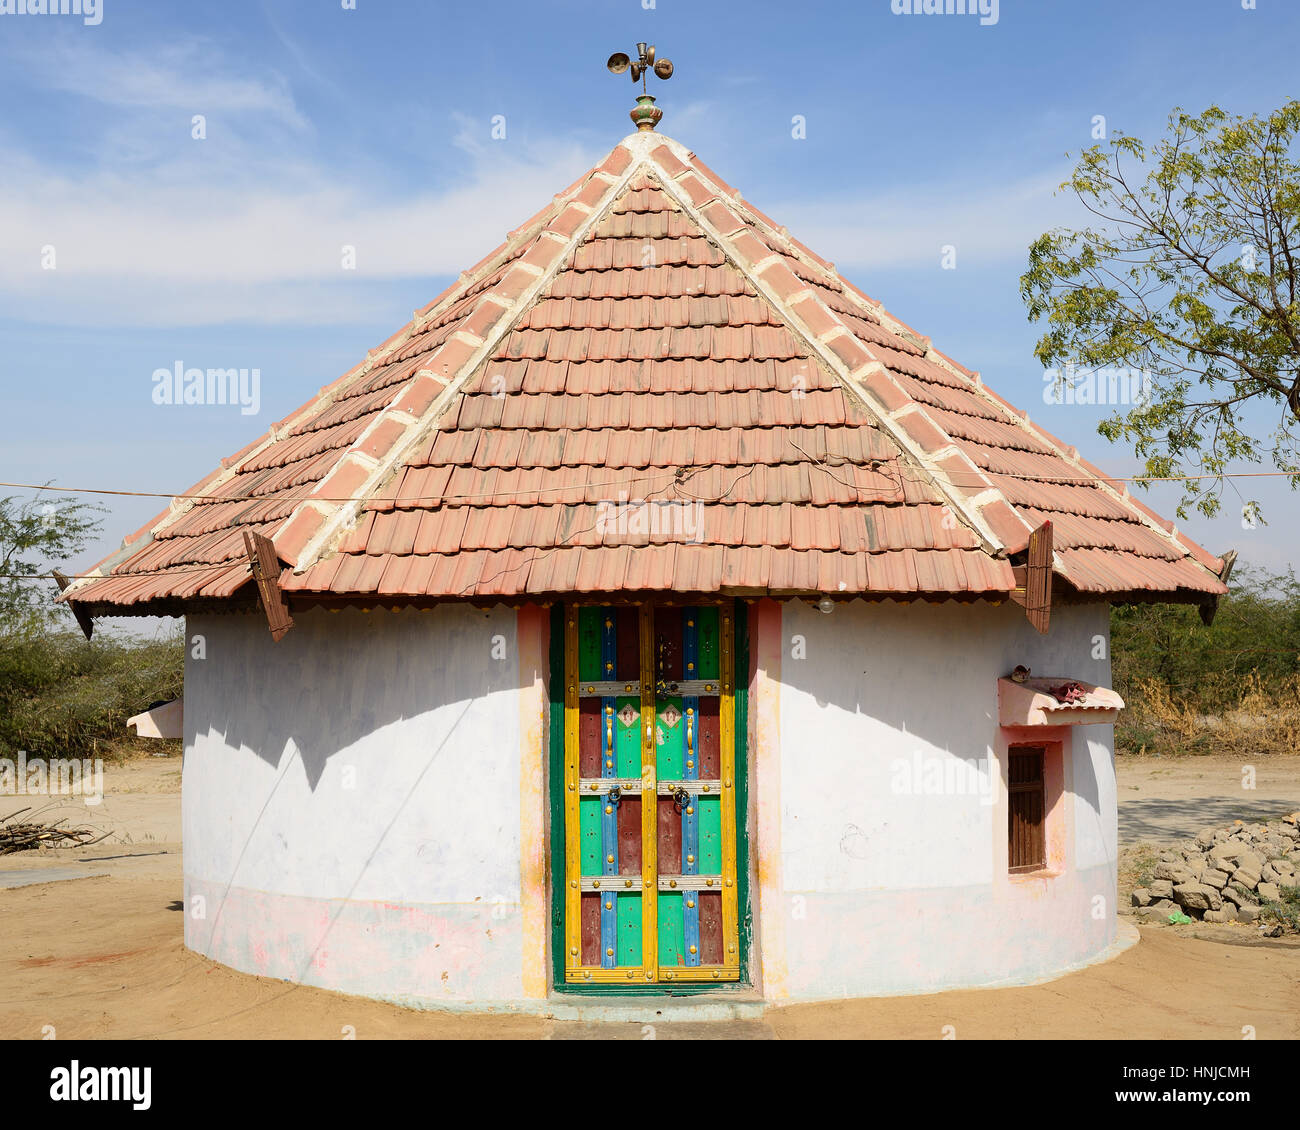 Traditionally decorated hut in the tribal village on the desert in India in the Gujarat state Stock Photo